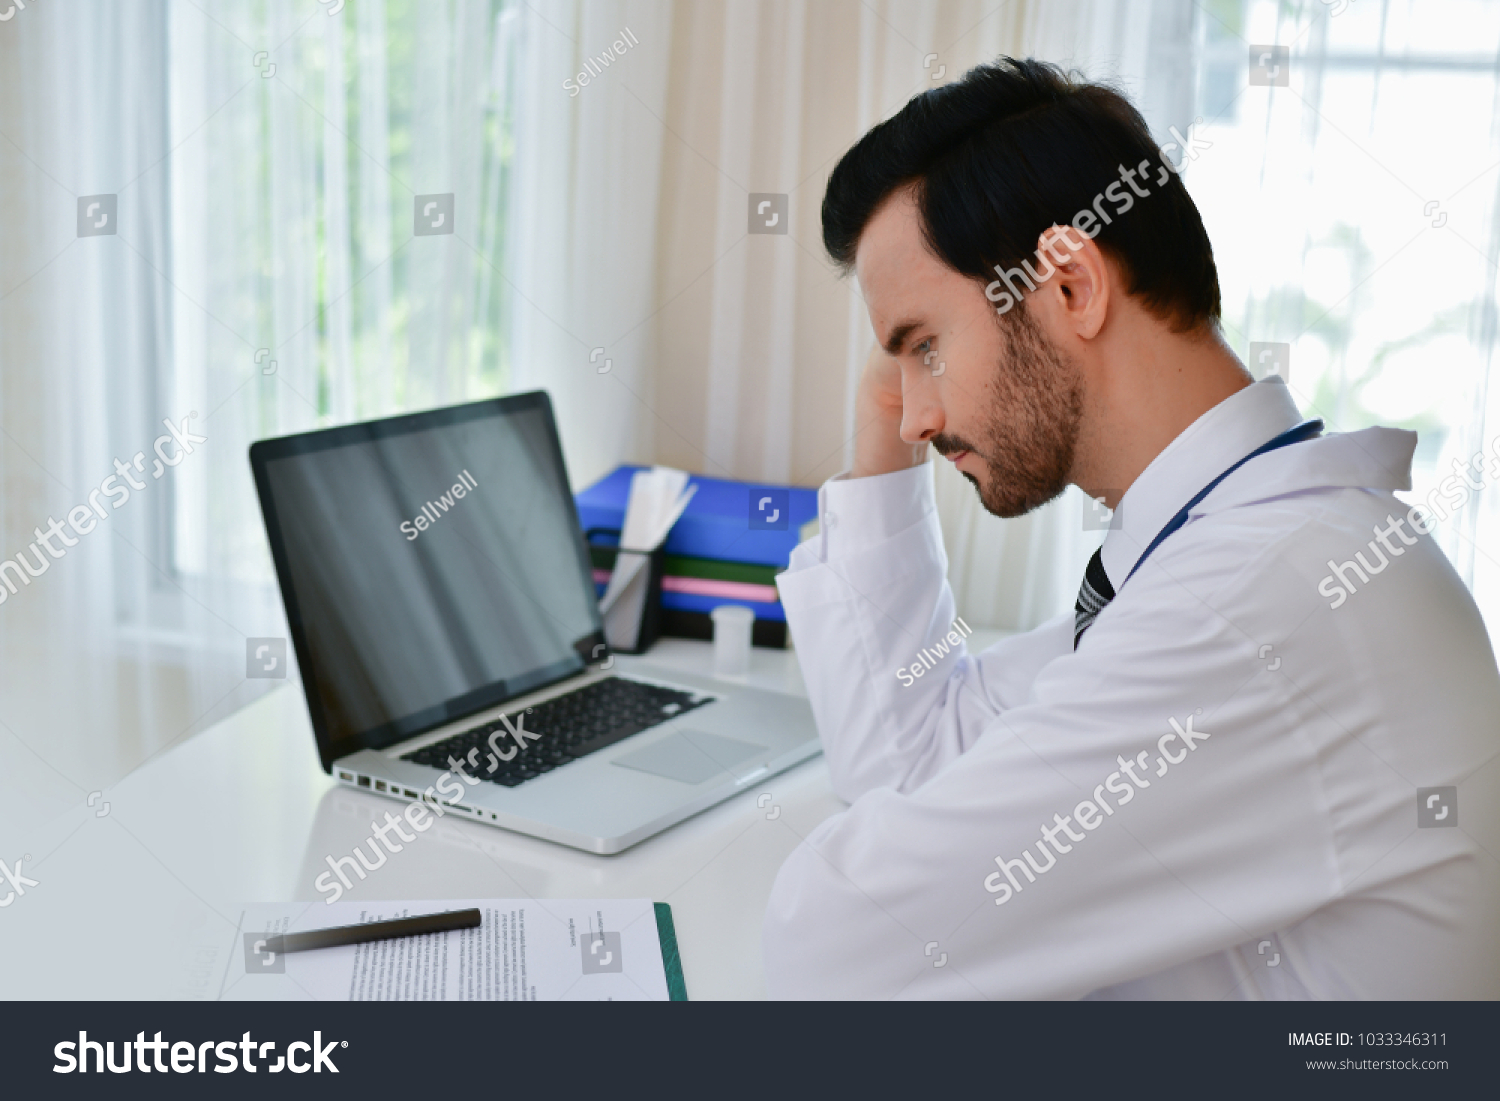 Doctor Concept. Doctors are making serious faces. The doctor is stressed about work. The doctor is feeling a headache at work. The doctor is feeling stressed in treating the patient. #1033346311